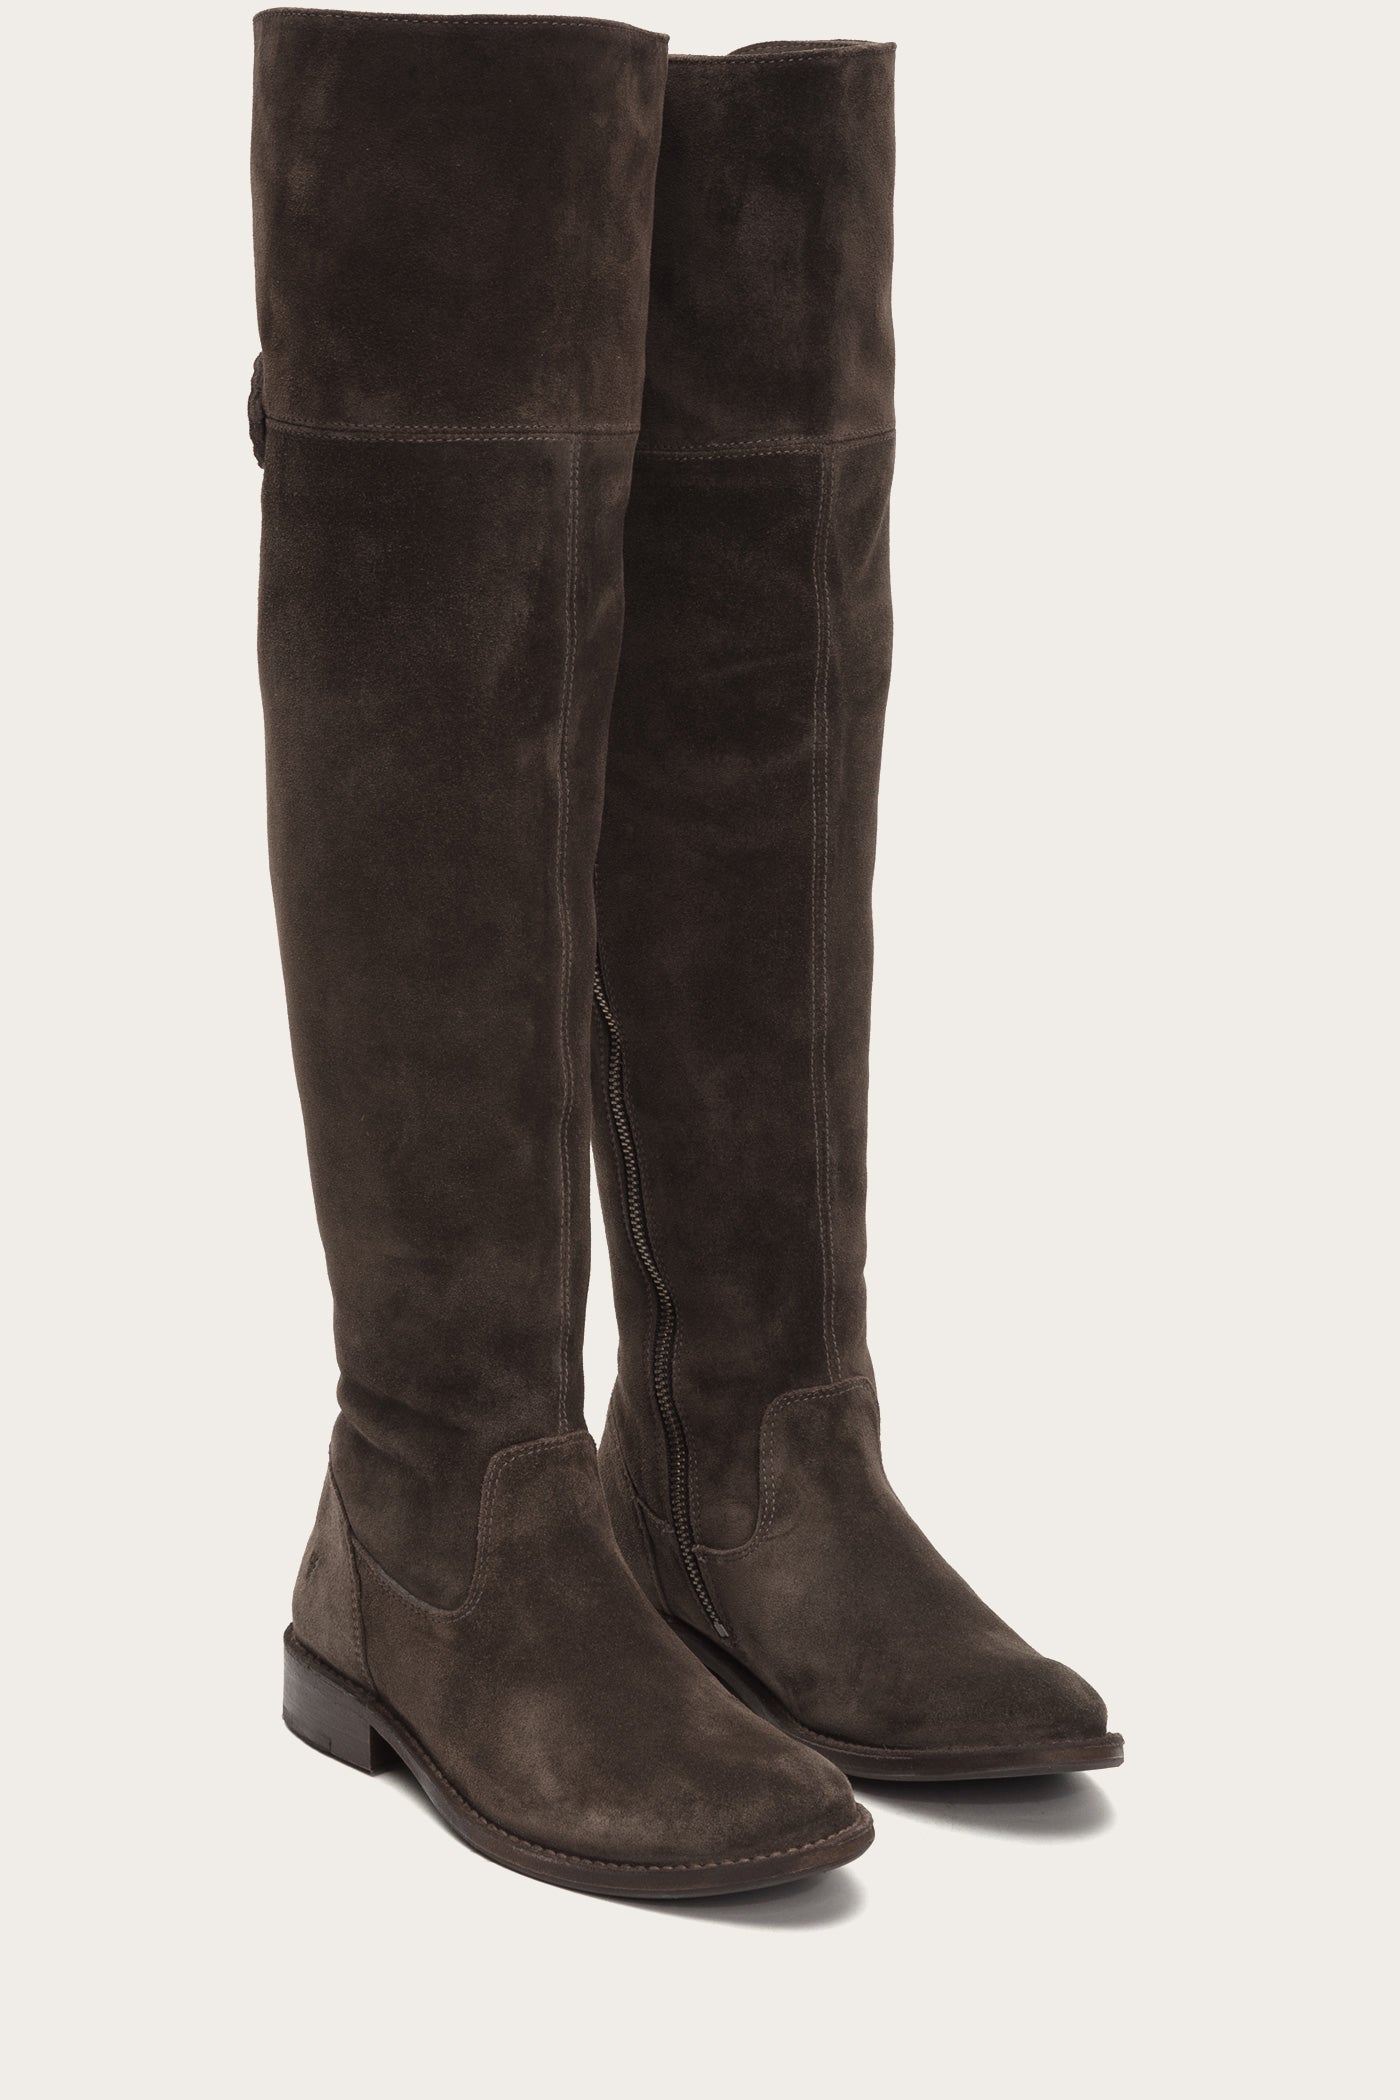 frye shirley over the knee boot